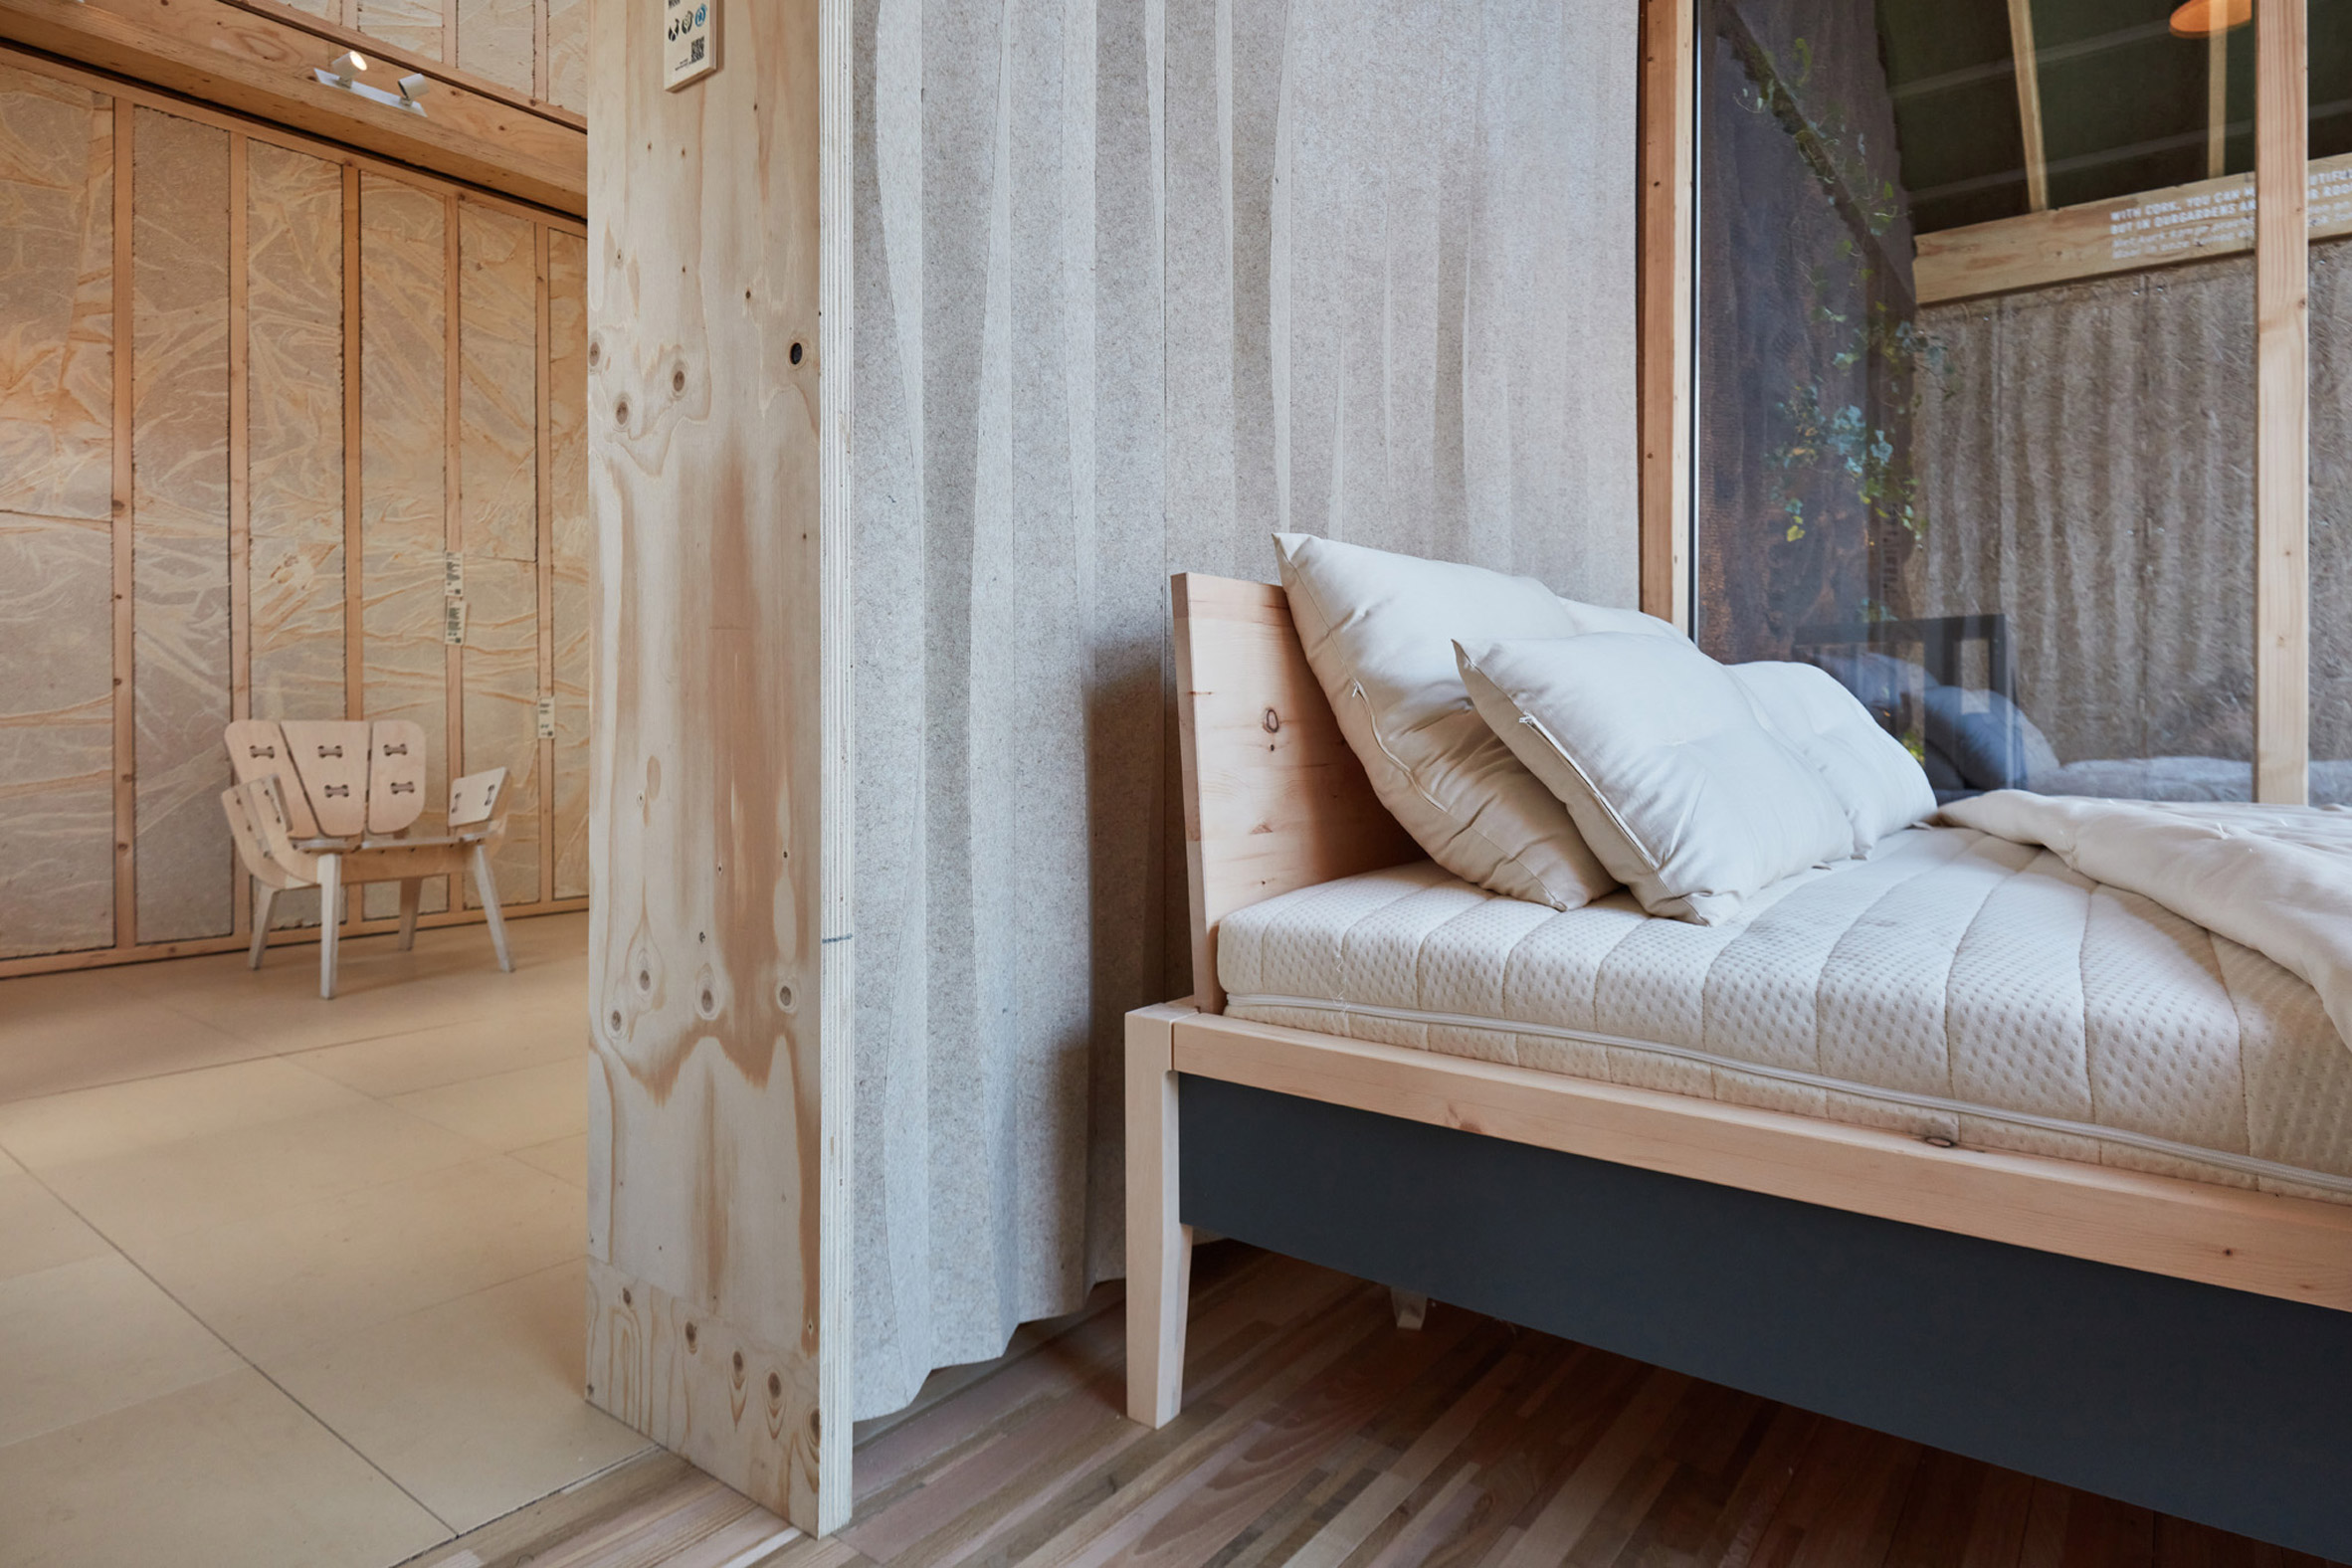 Bedroom in biomaterials house by Biobased Creations